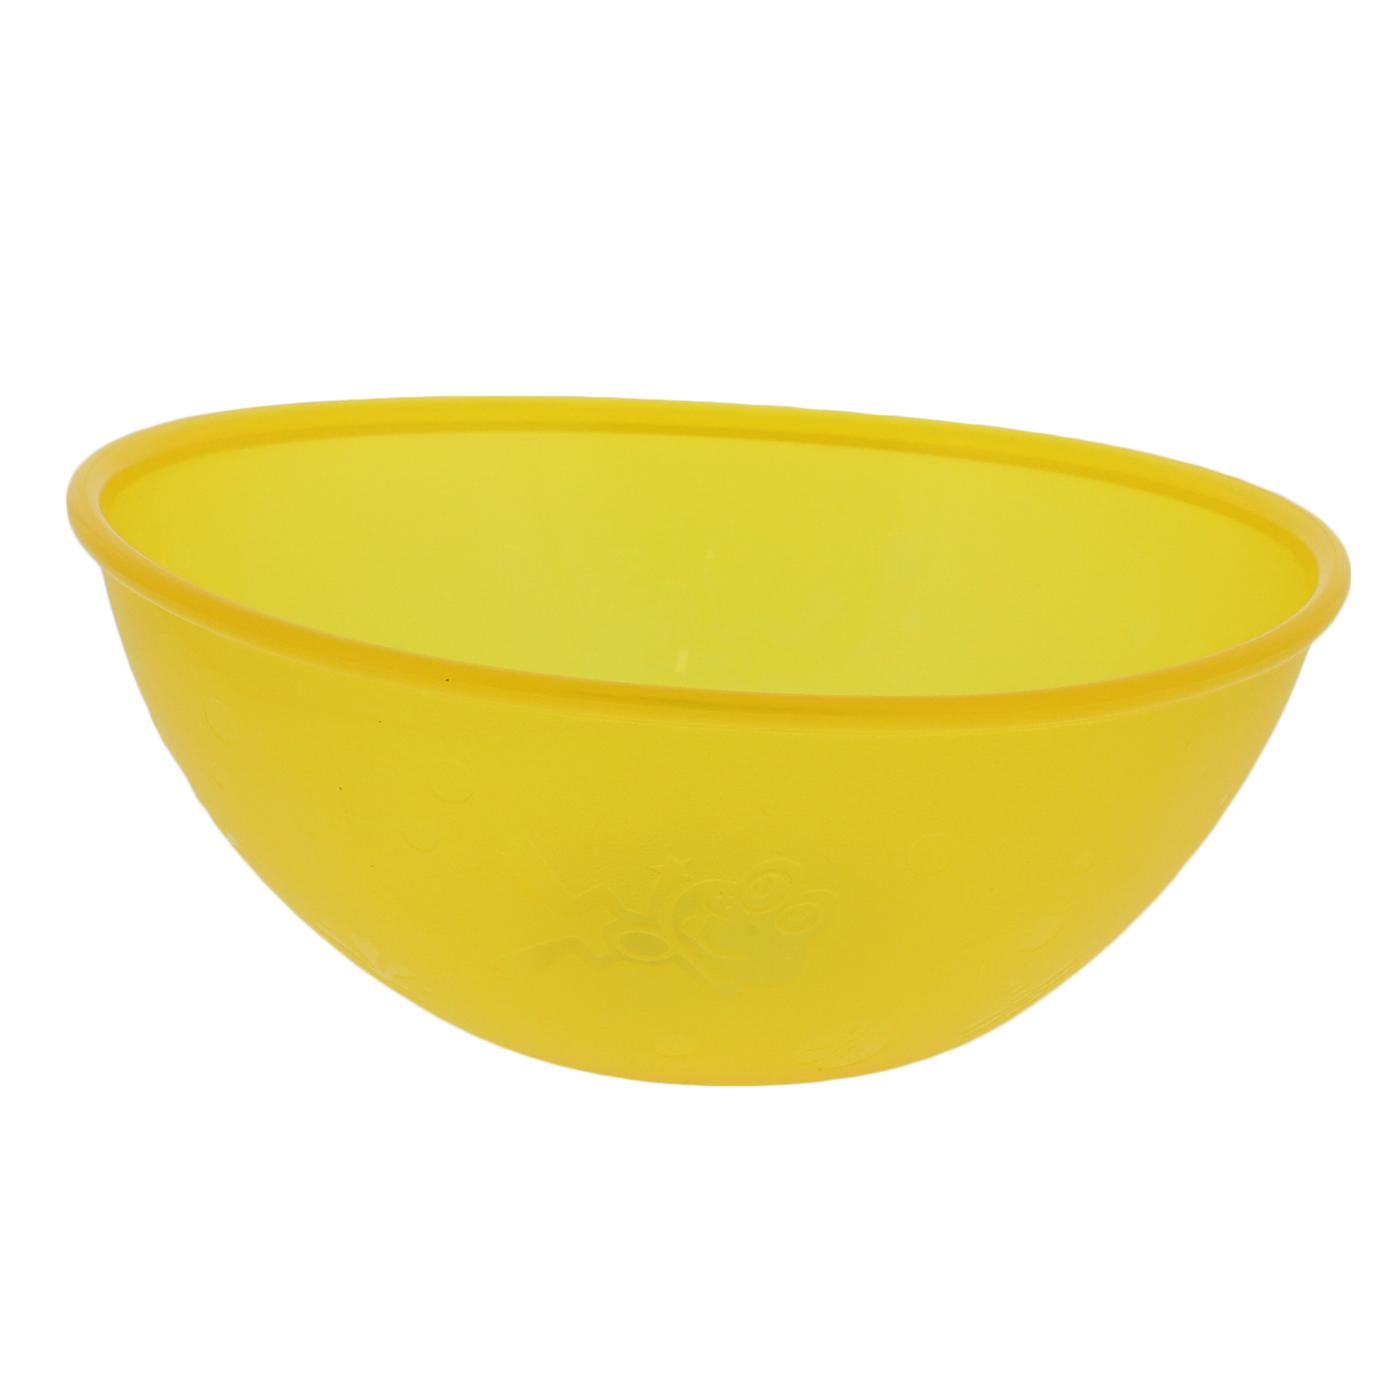 Nuby Embossed Value Feeding Bowl, Assorted Colors; image 2 of 6